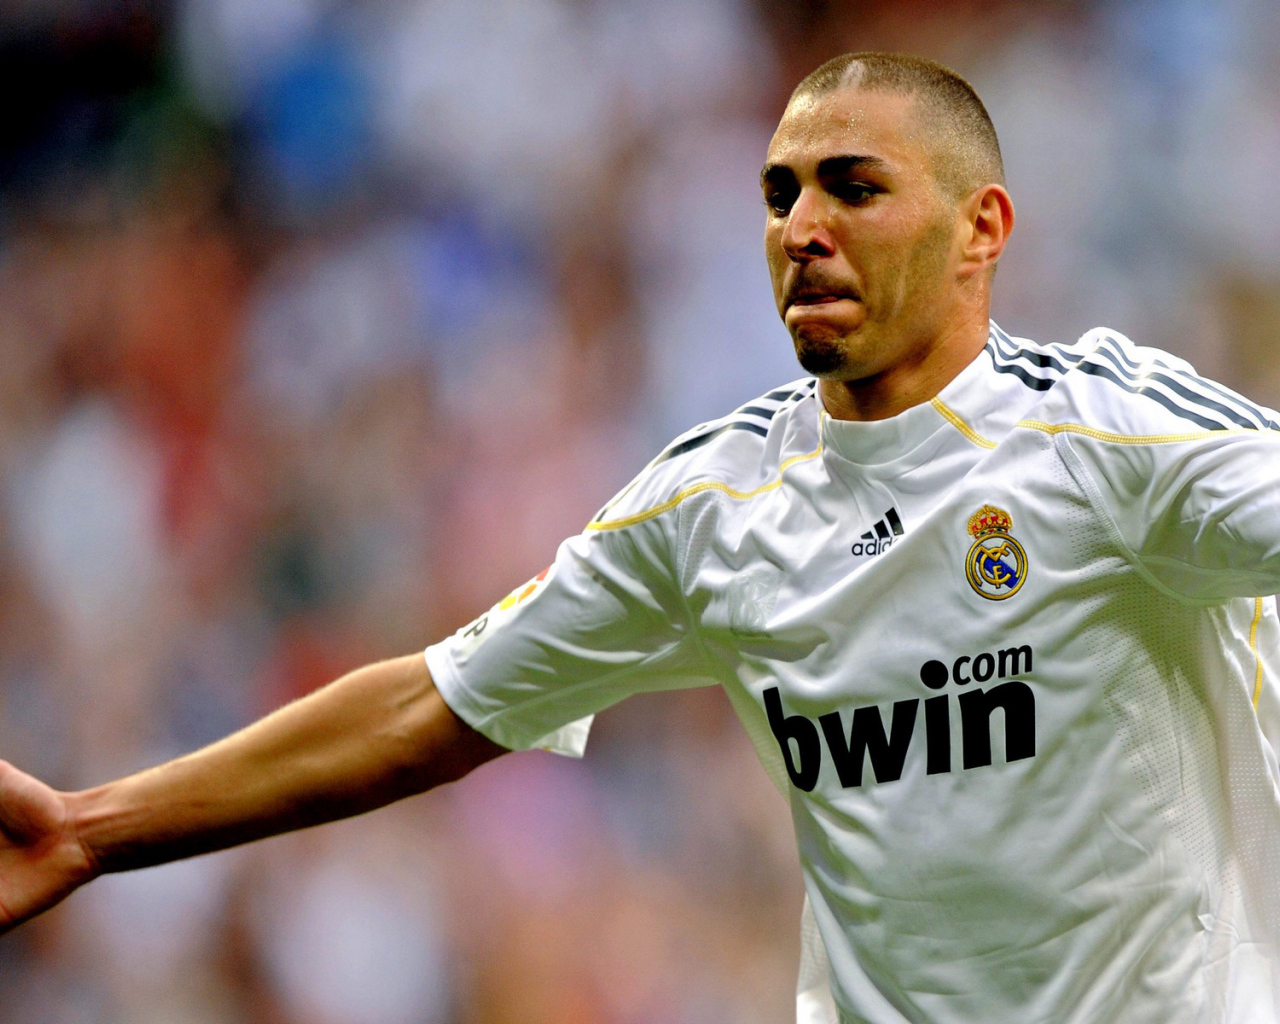 The player of Real Madrid Karim Benzema won the game